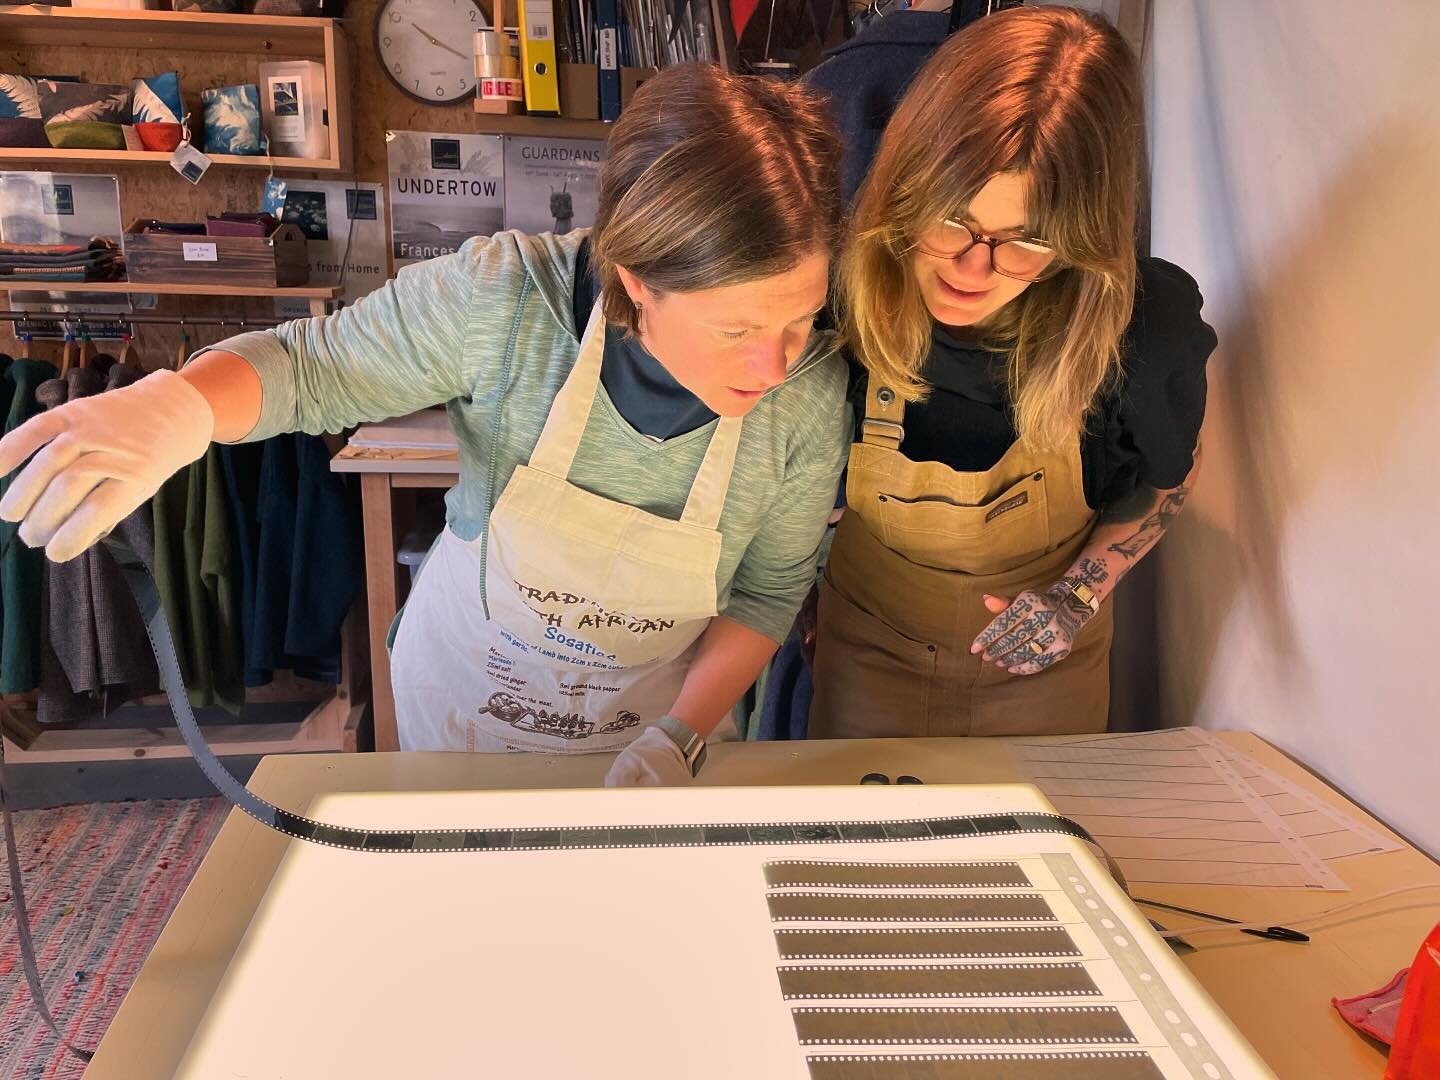 A huge thank you to the wonderful Jess Holdengarde for sharing her time, knowledge and creativity with such generosity in her Frames of Spring workshop over the weekend. 

The sun shone and beautiful prints were created with island-foraged and brewed